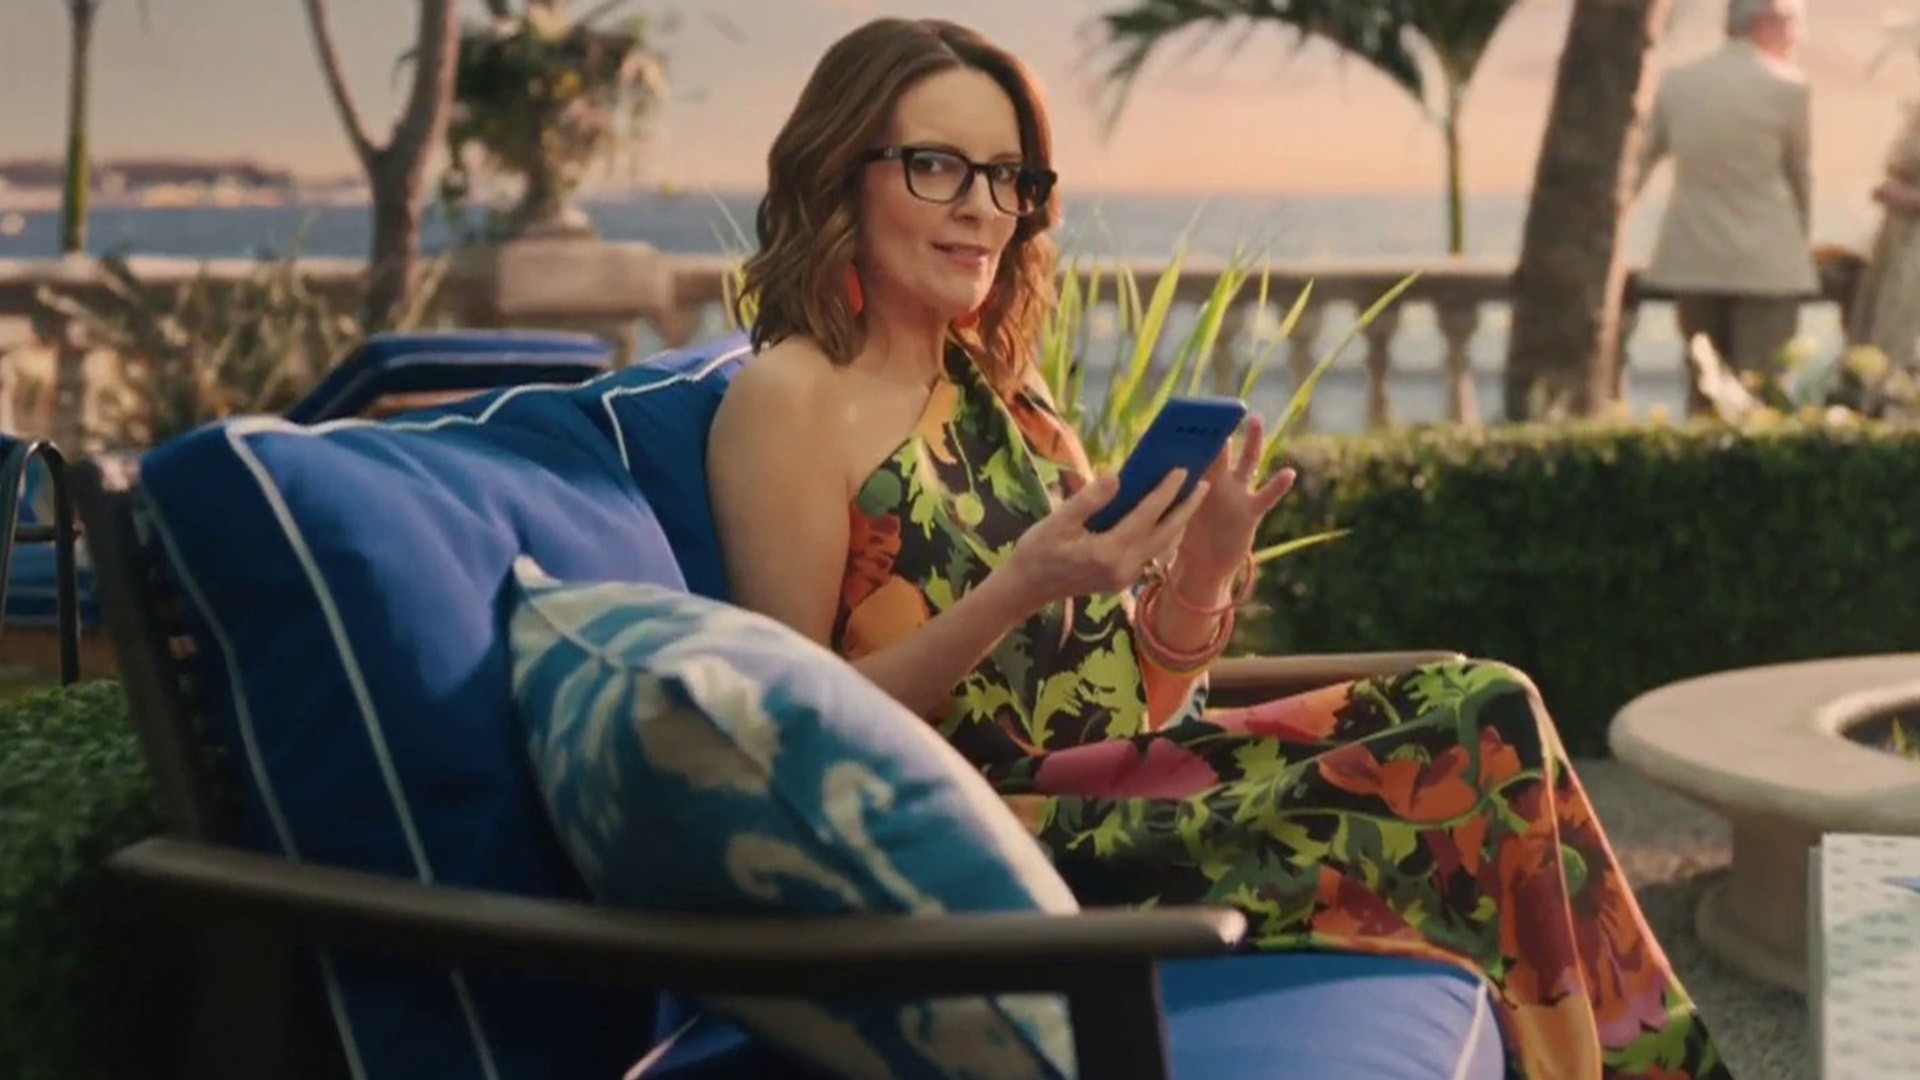 See Booking.com's Super Bowl commercial starring Tina Fey